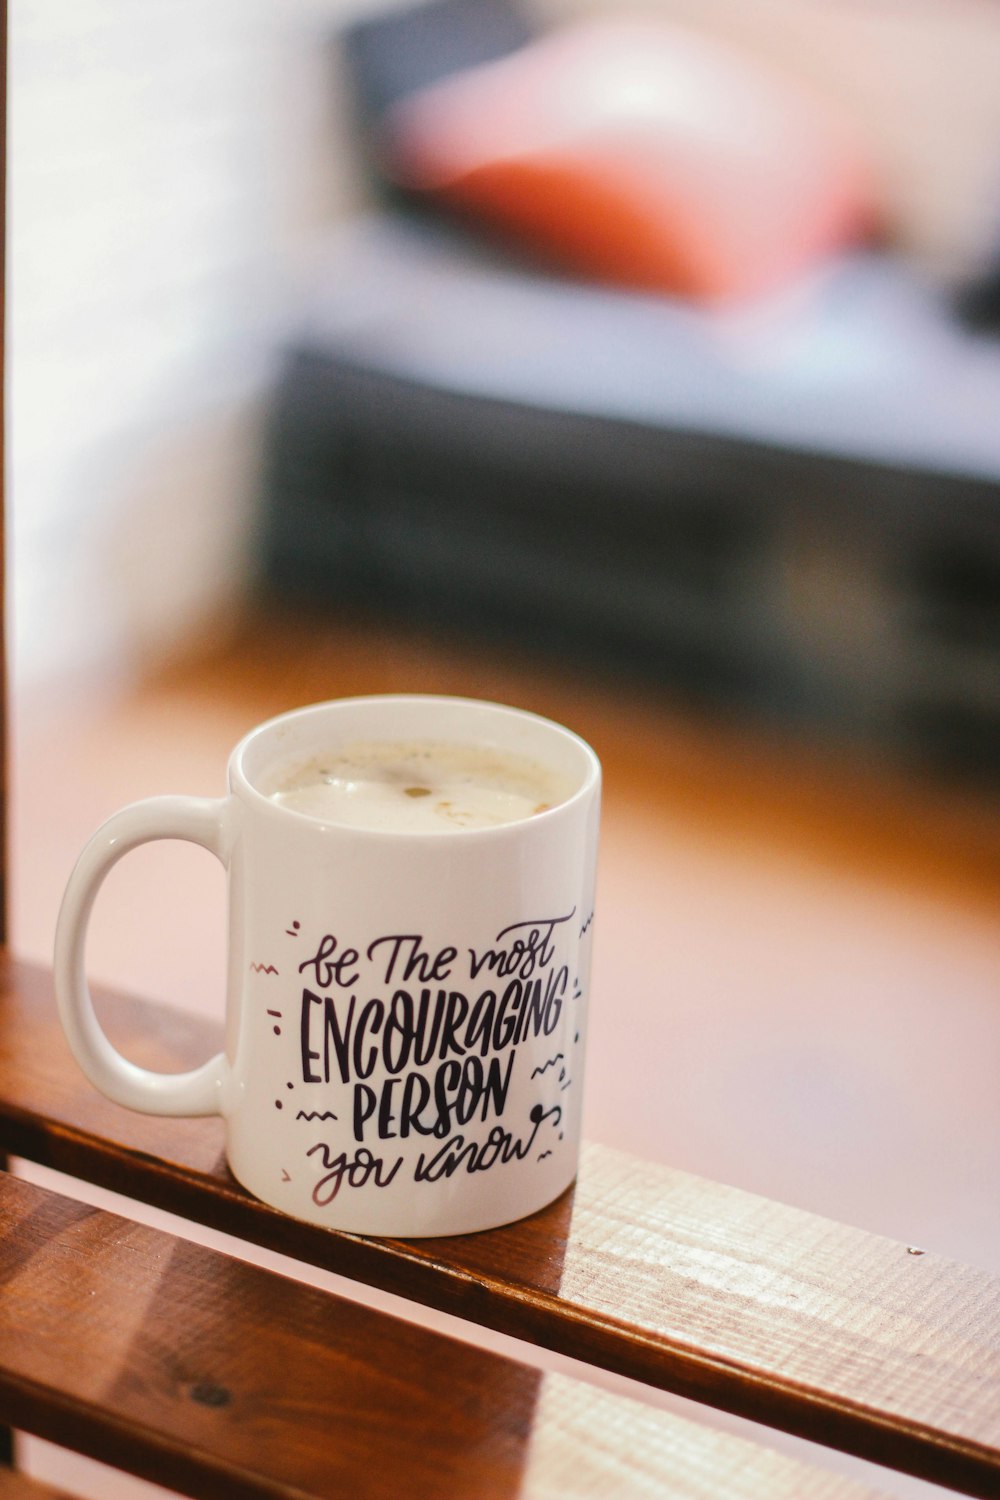 A cup that says "Be the most encouraging person."